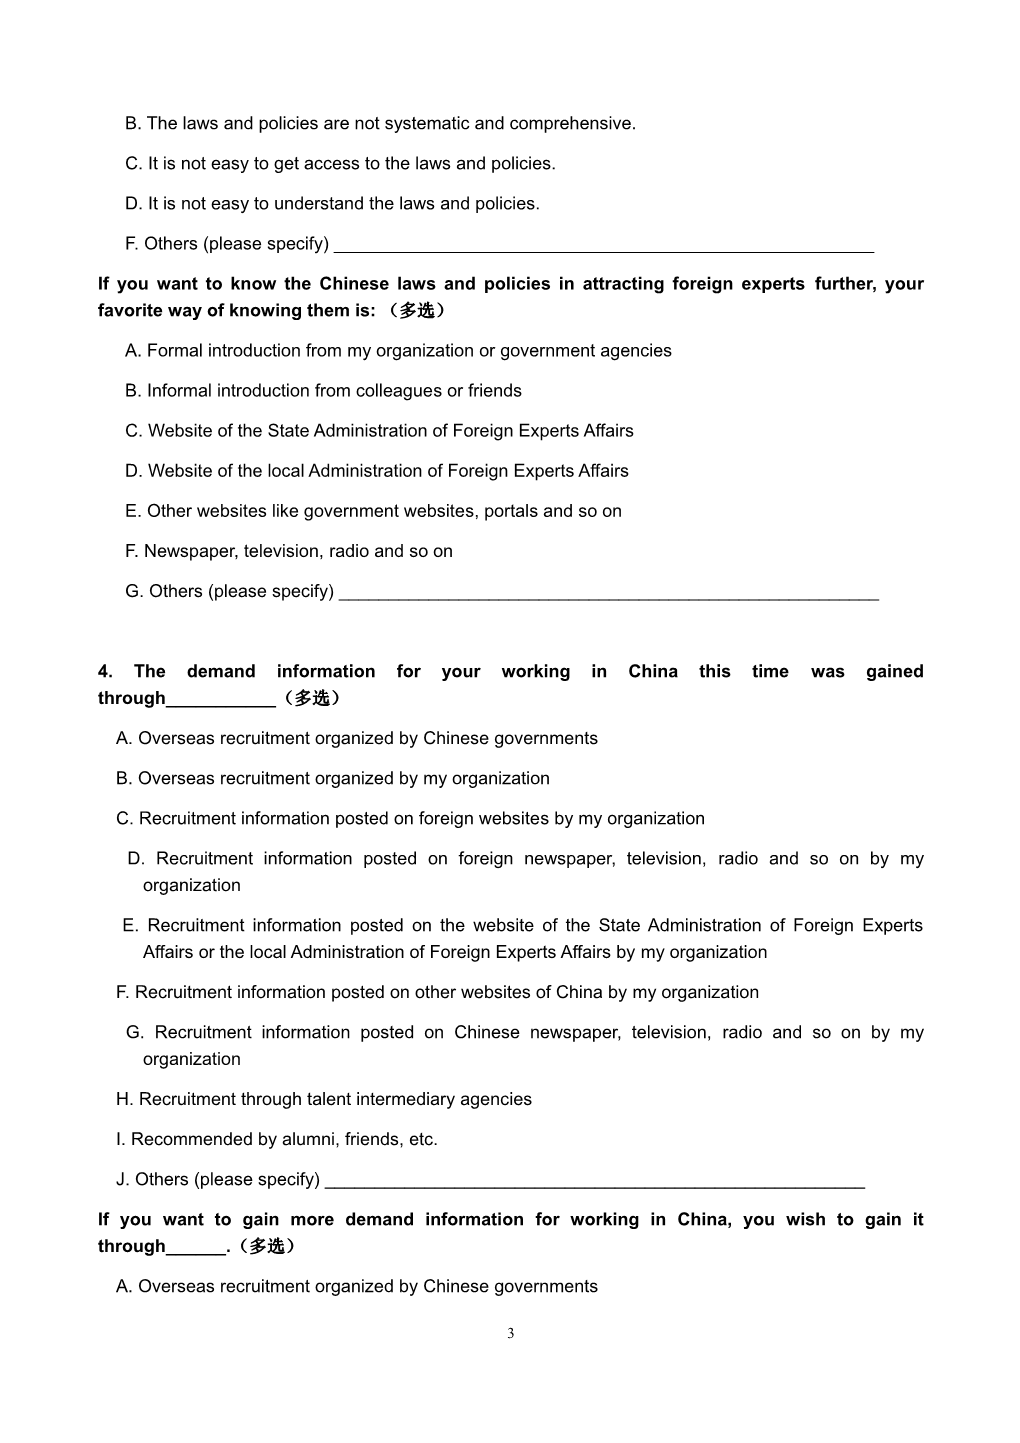 Questionnaire for Foreign Experts